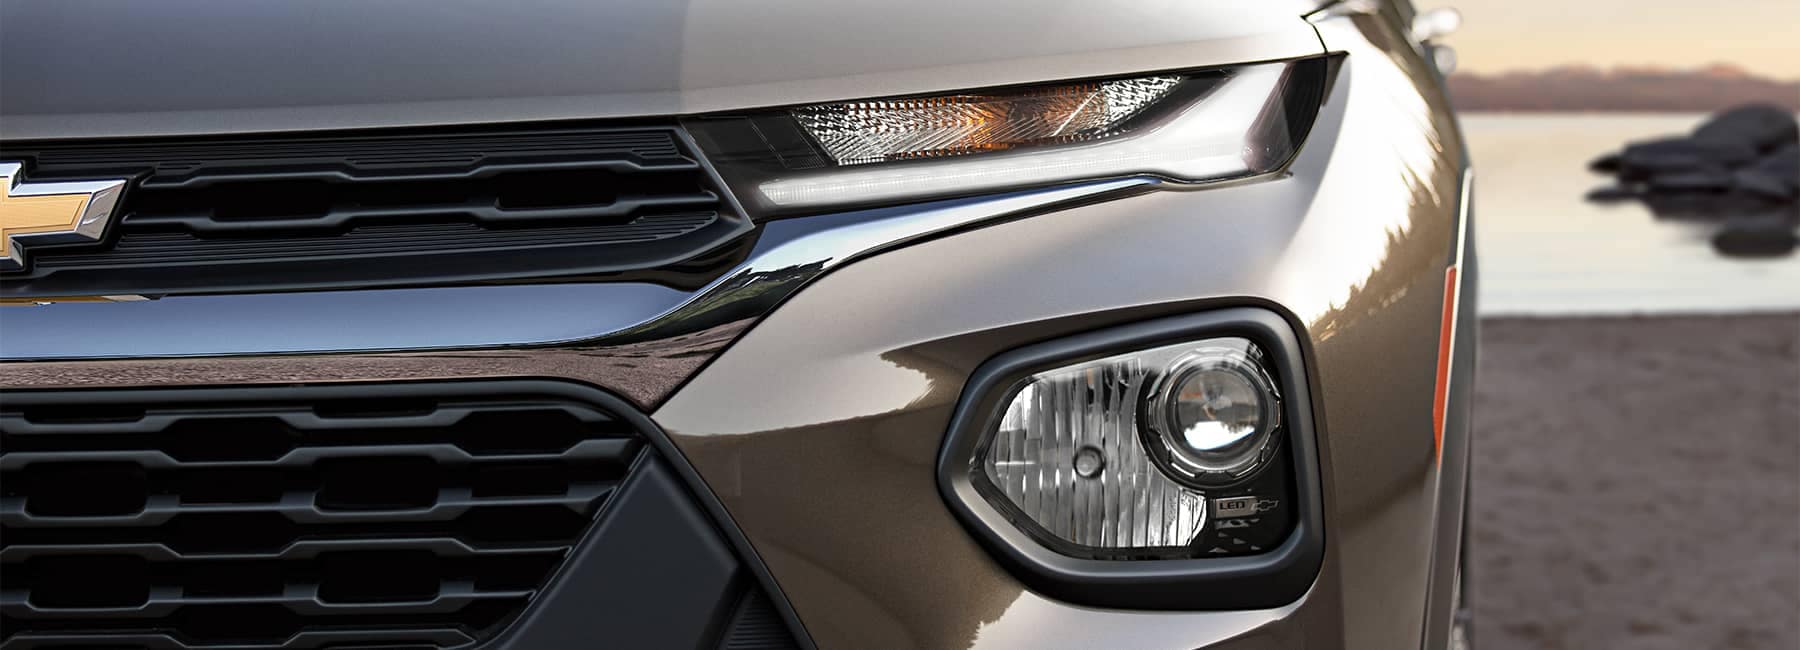 The front grille of a 2021 Chevrolet Trailblazer